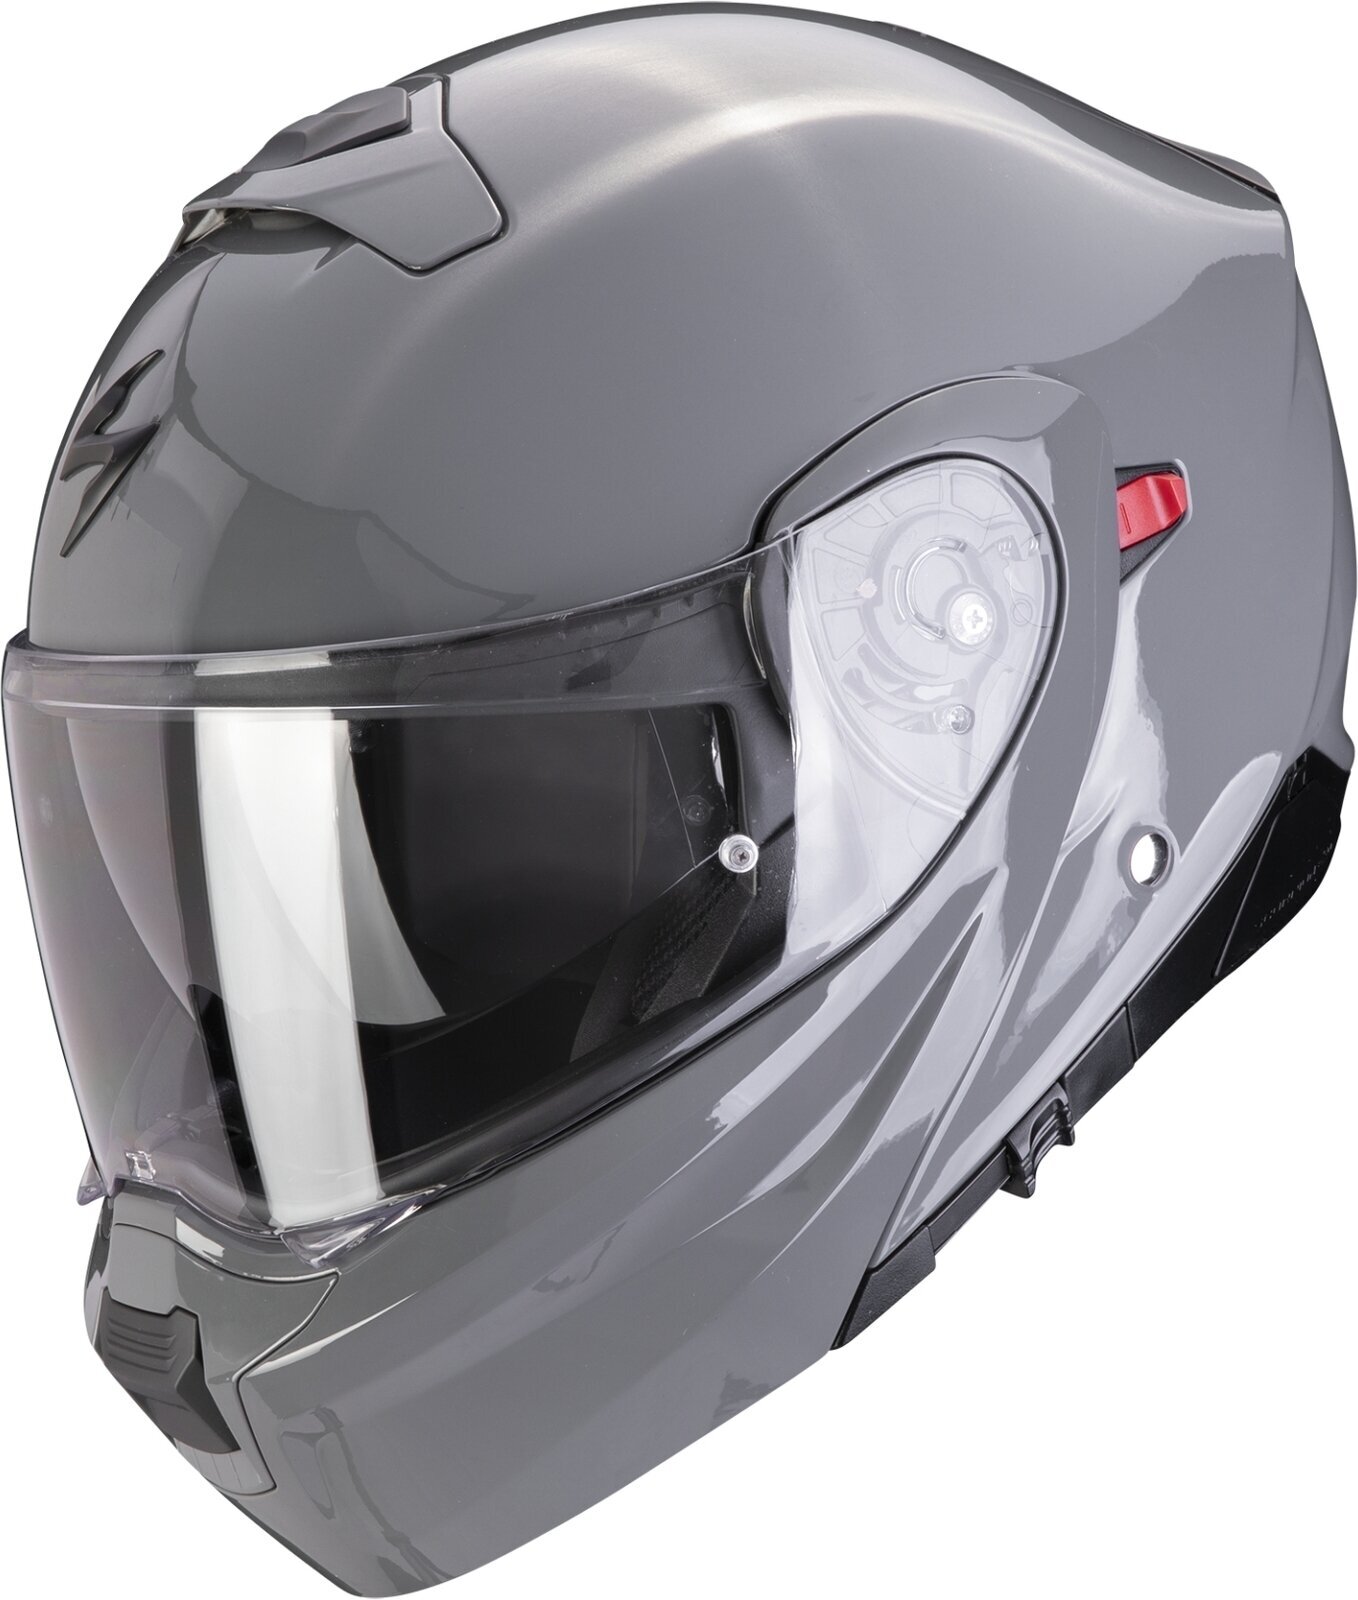 Kask Scorpion EXO 930 EVO SOLID Cement Grey S Kask